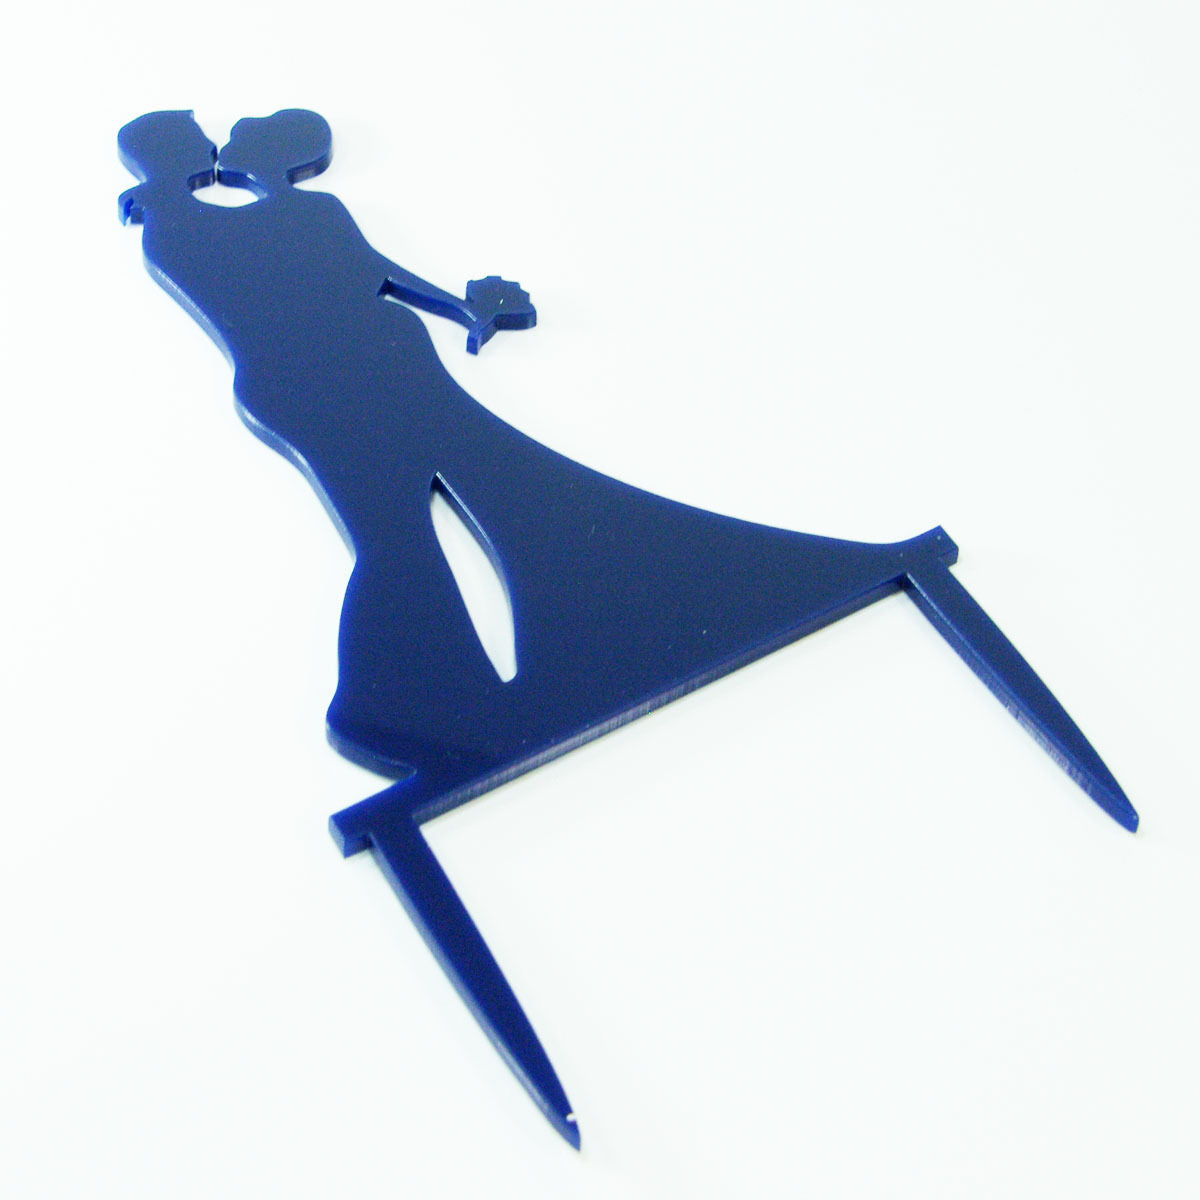 Couple Silhouette Proposal Wedding Engagement Cake Topper Decoration Mirror